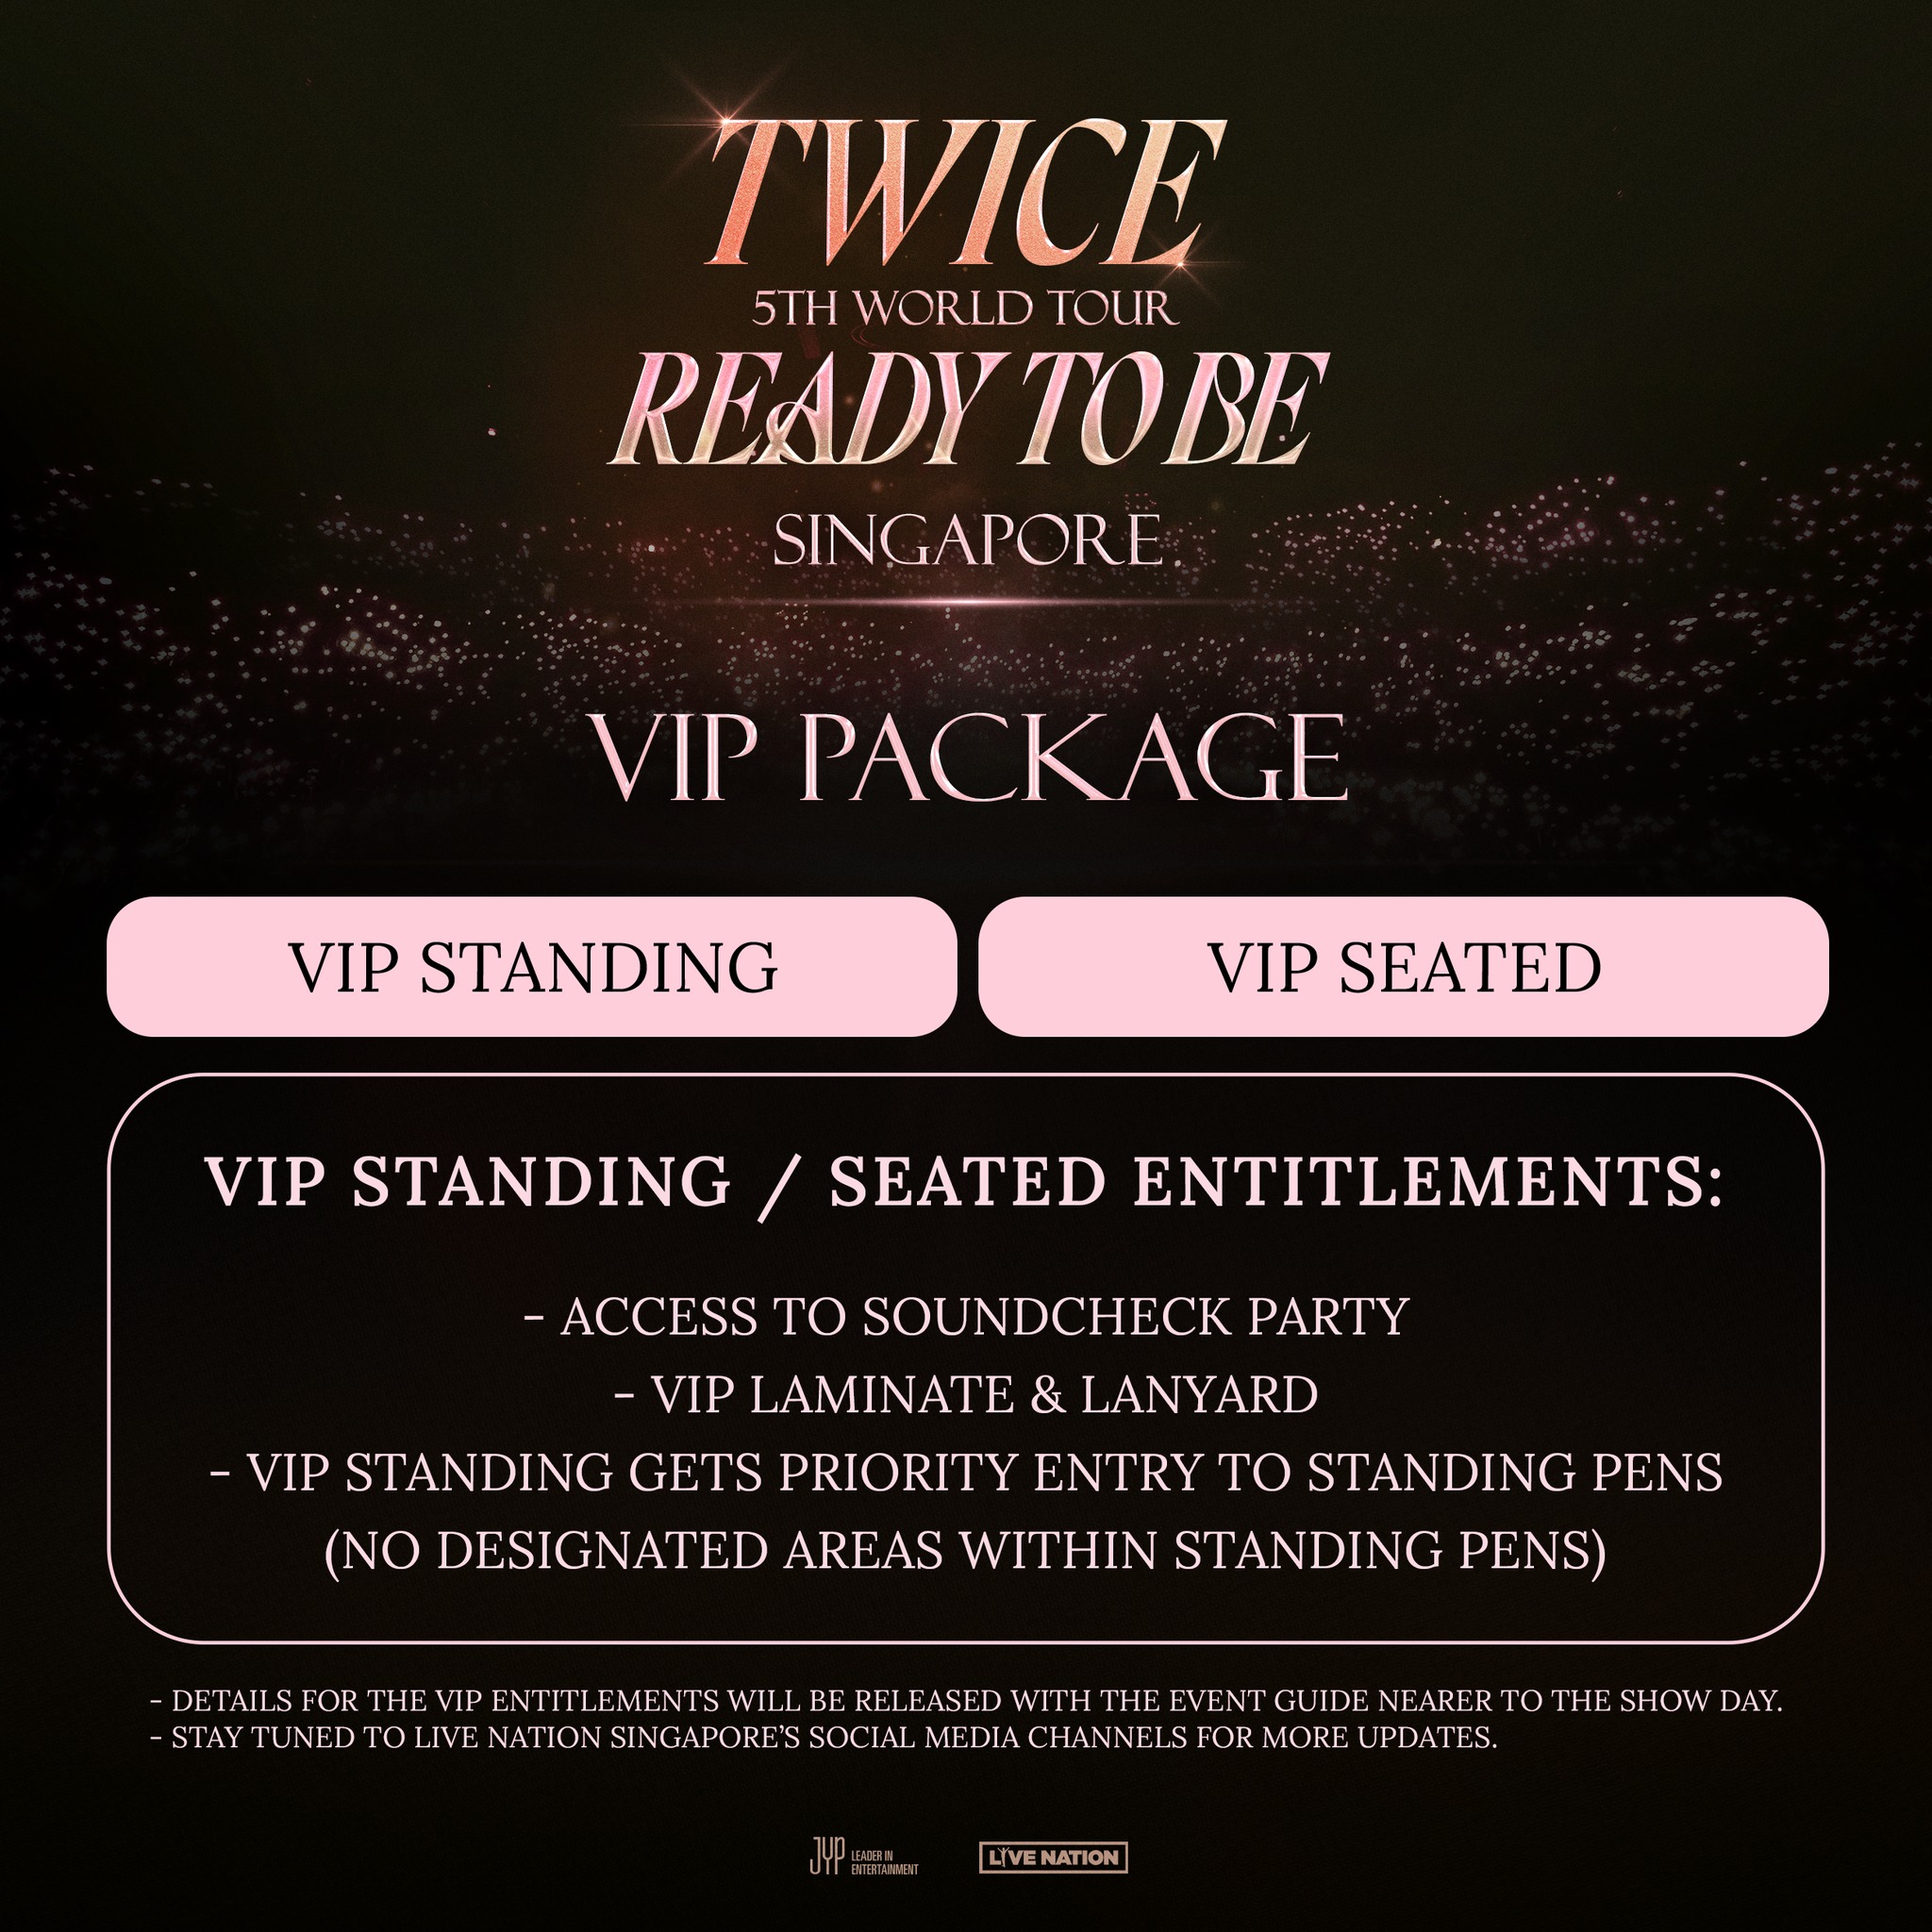 TWICE 5TH WORLD TOUR 'READY TO BE